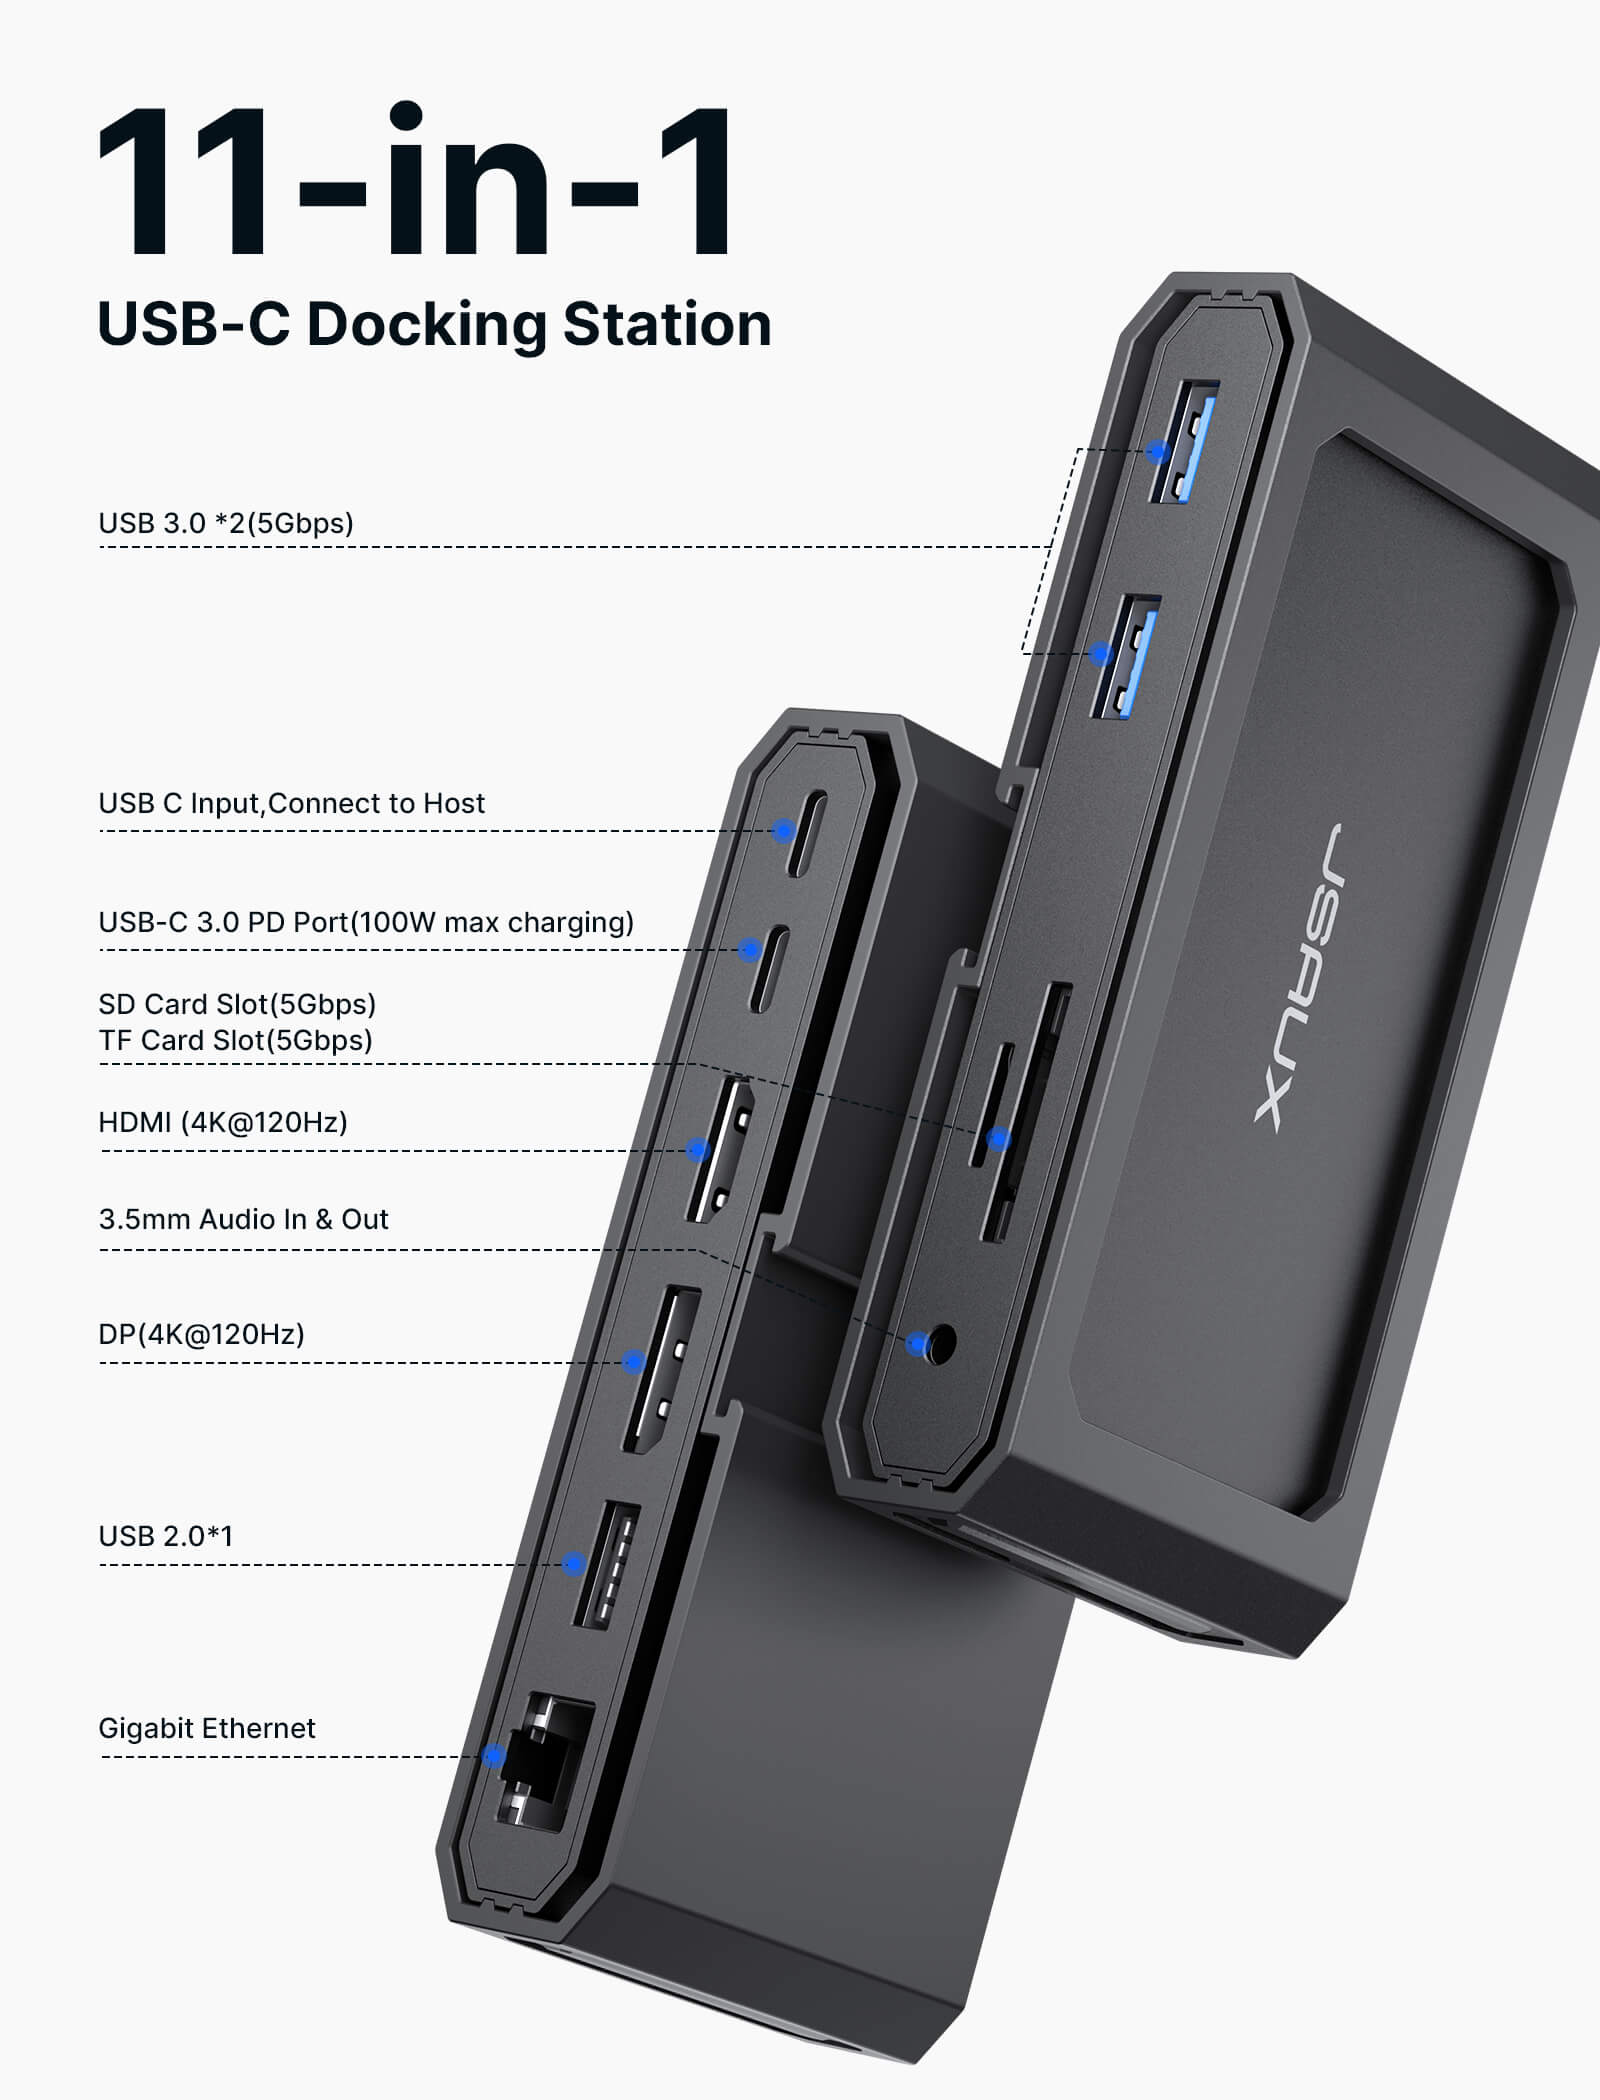 11-in-1 Docking Station Success